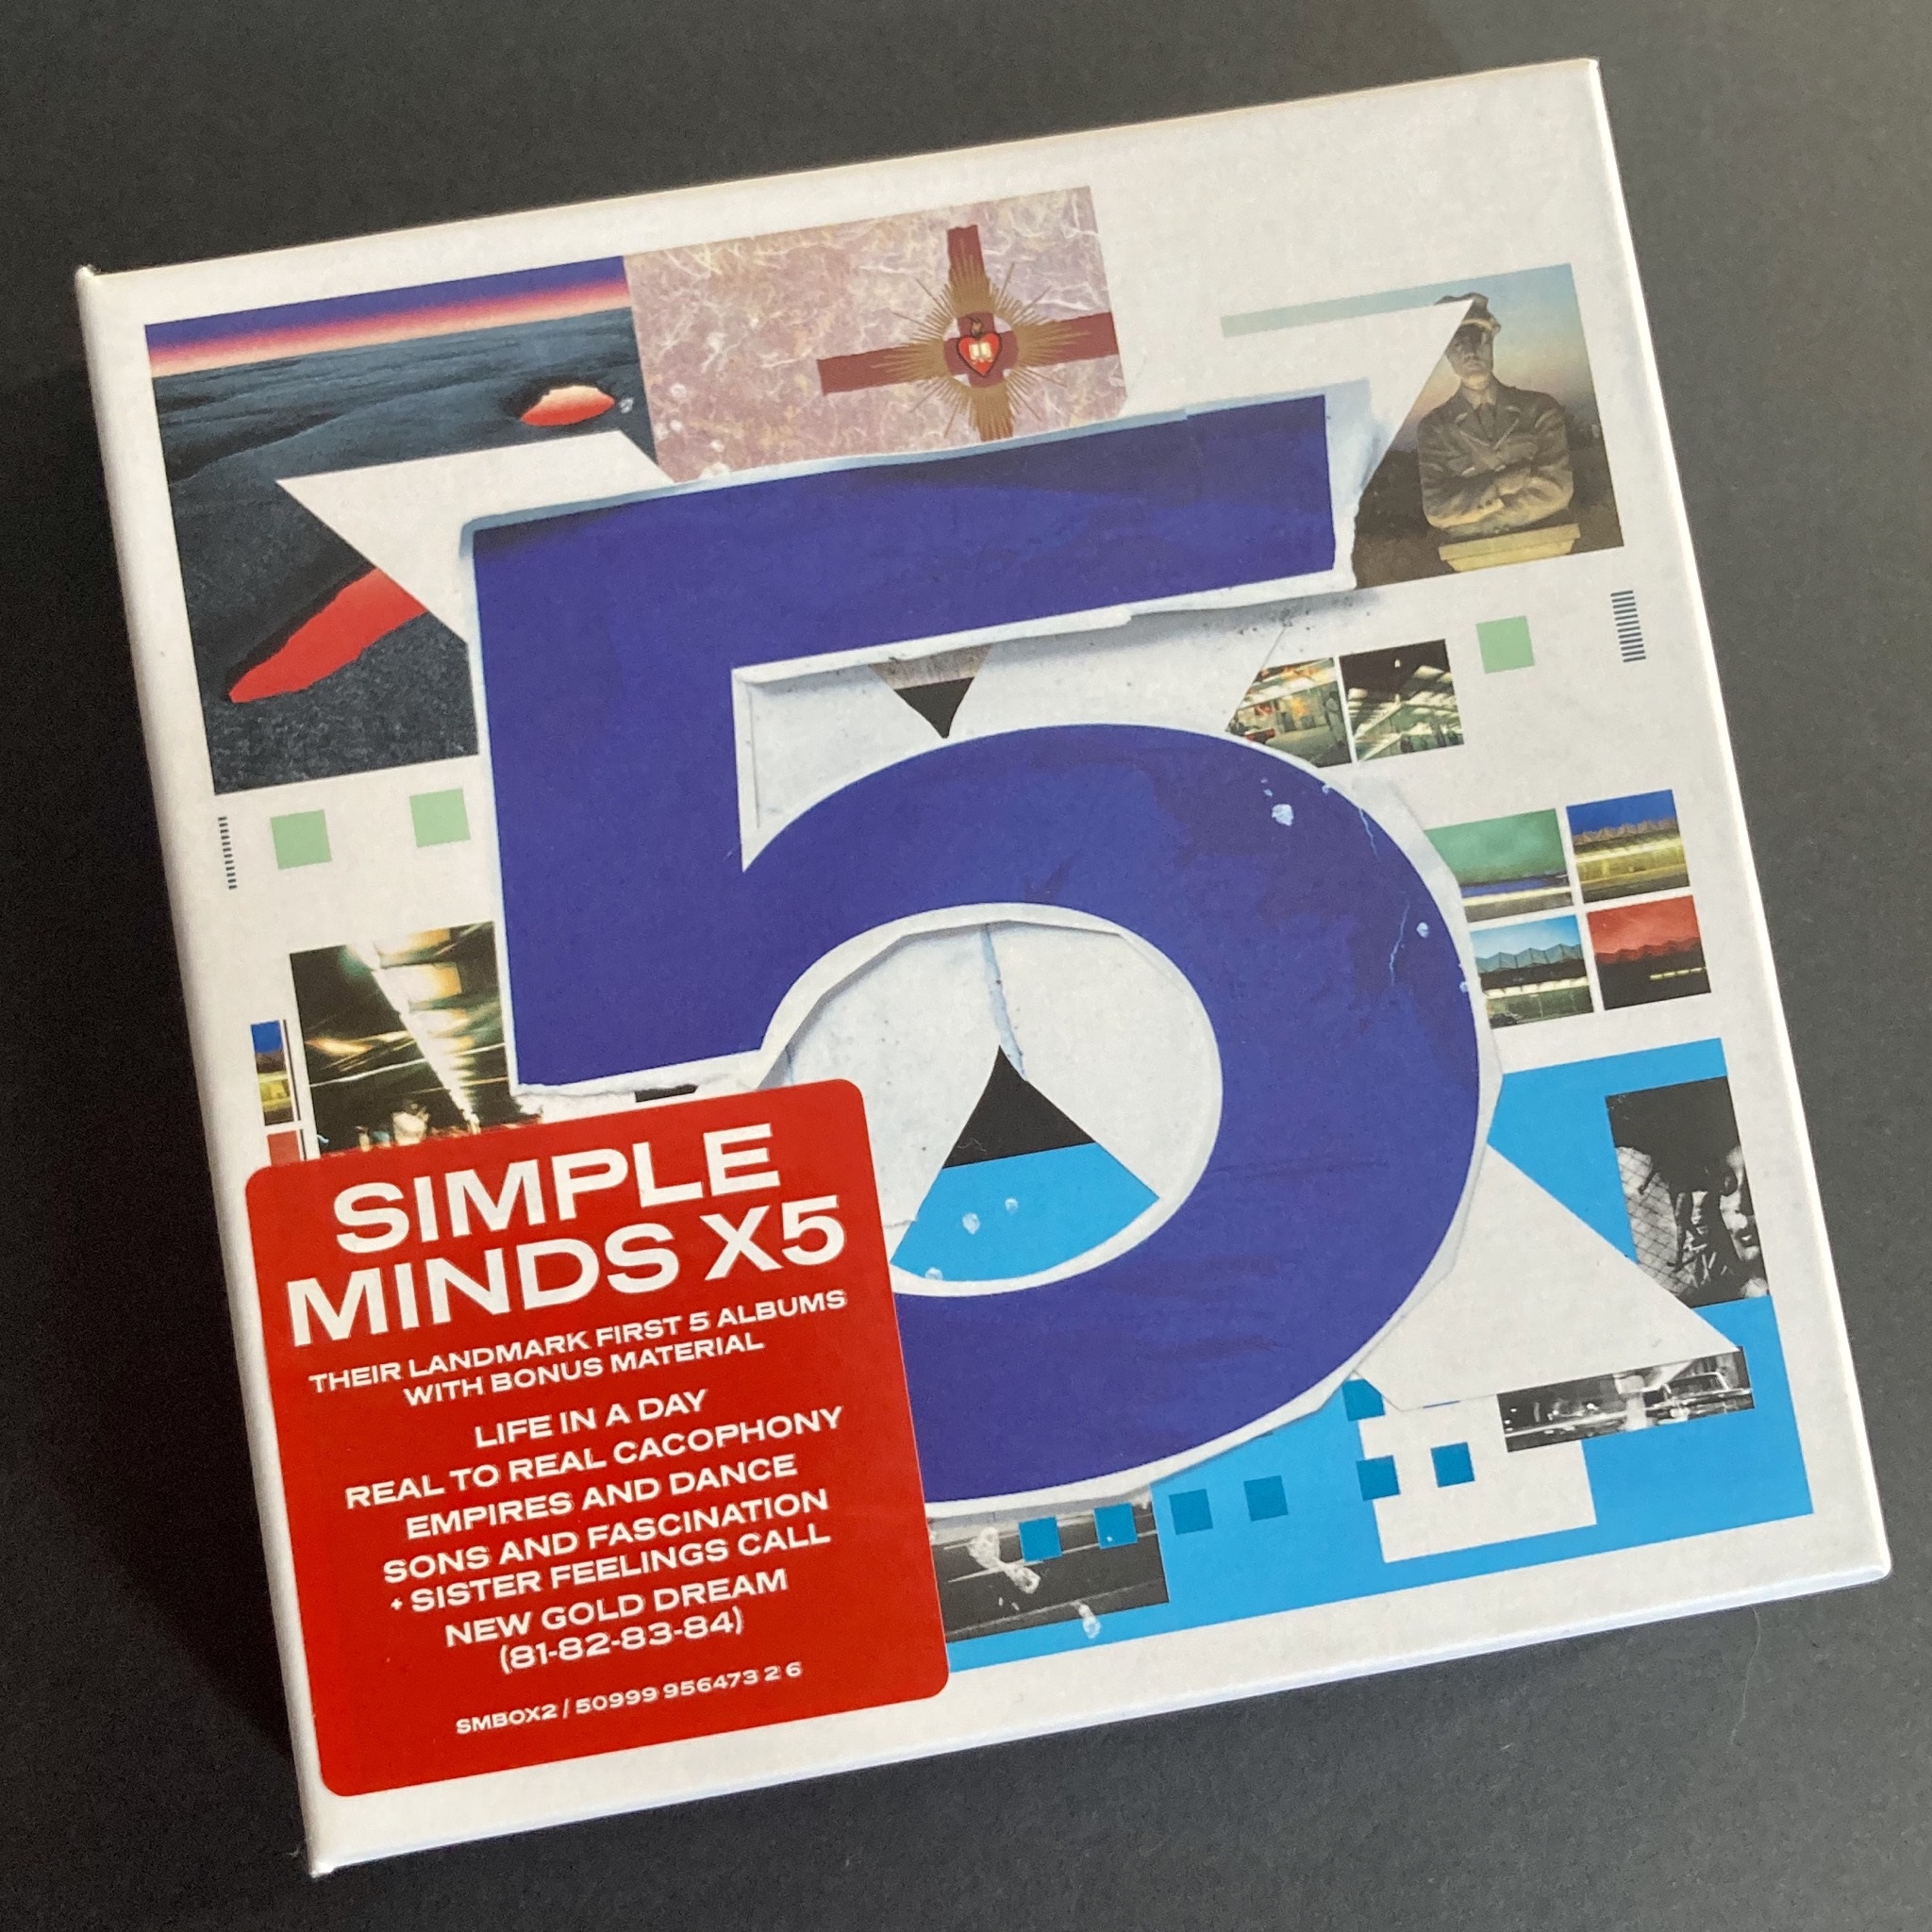 Simple Minds 'X5' CD Box Set edition - box front